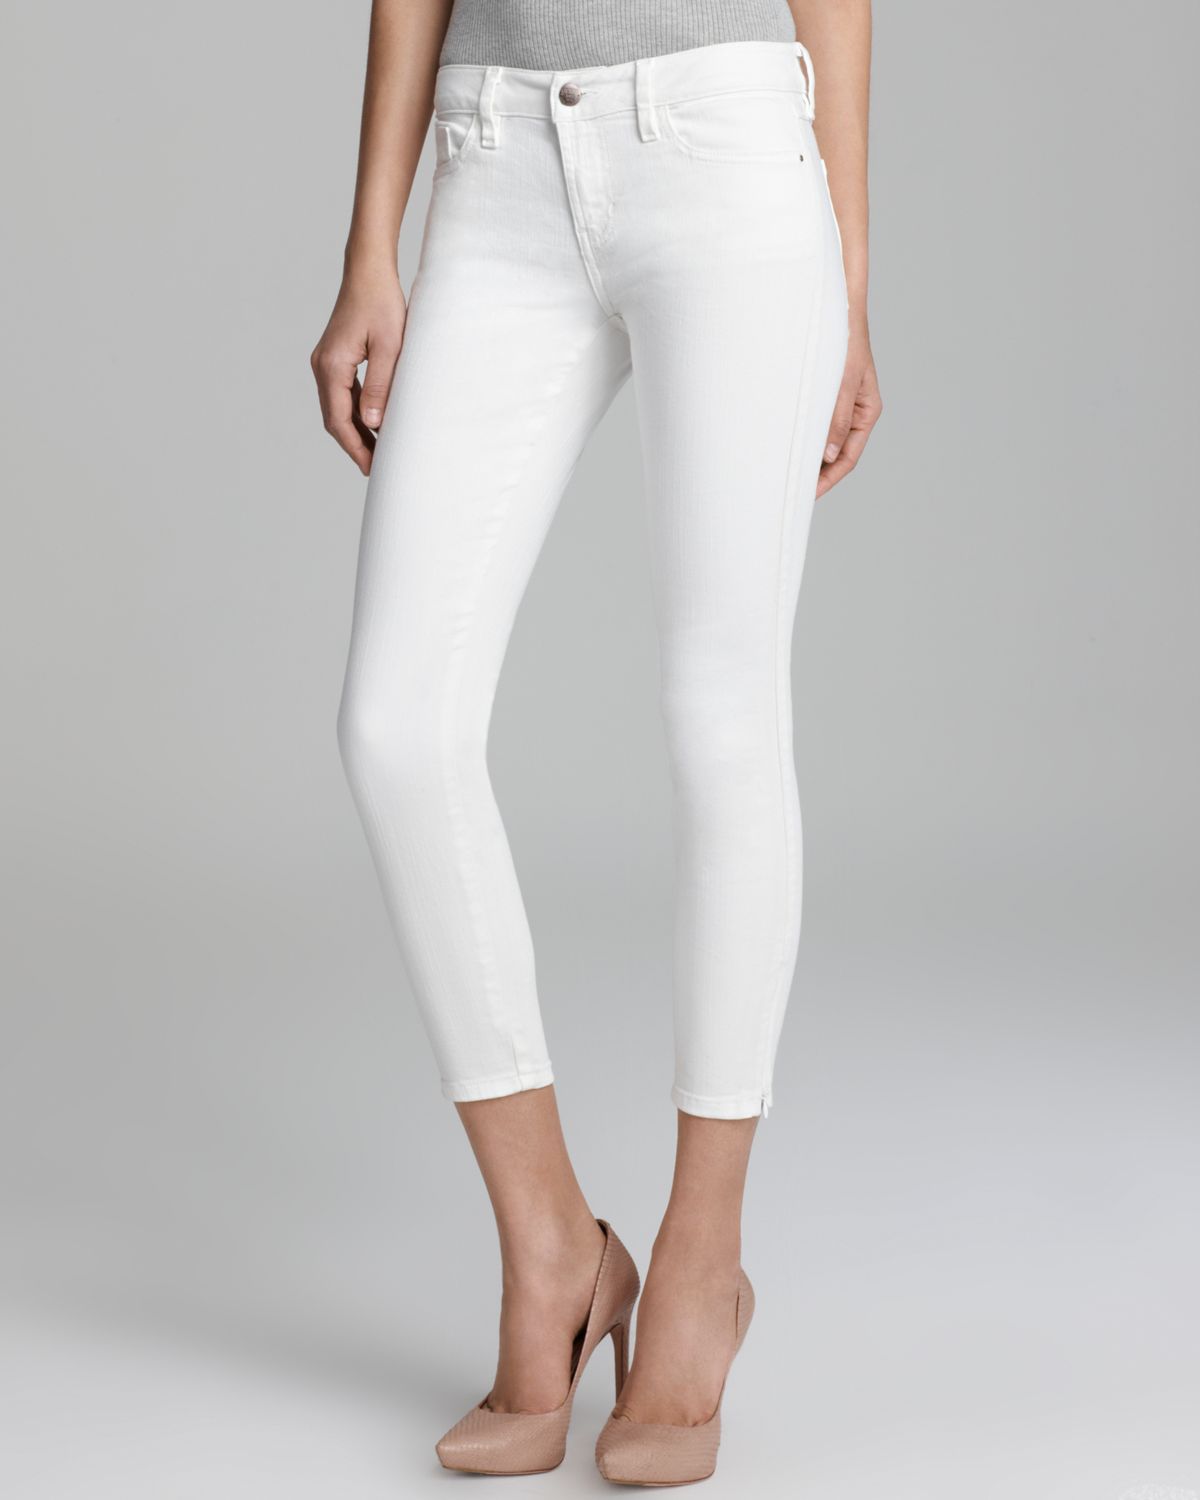 Guess Jeans Brittney Zip Cropped in White | Lyst